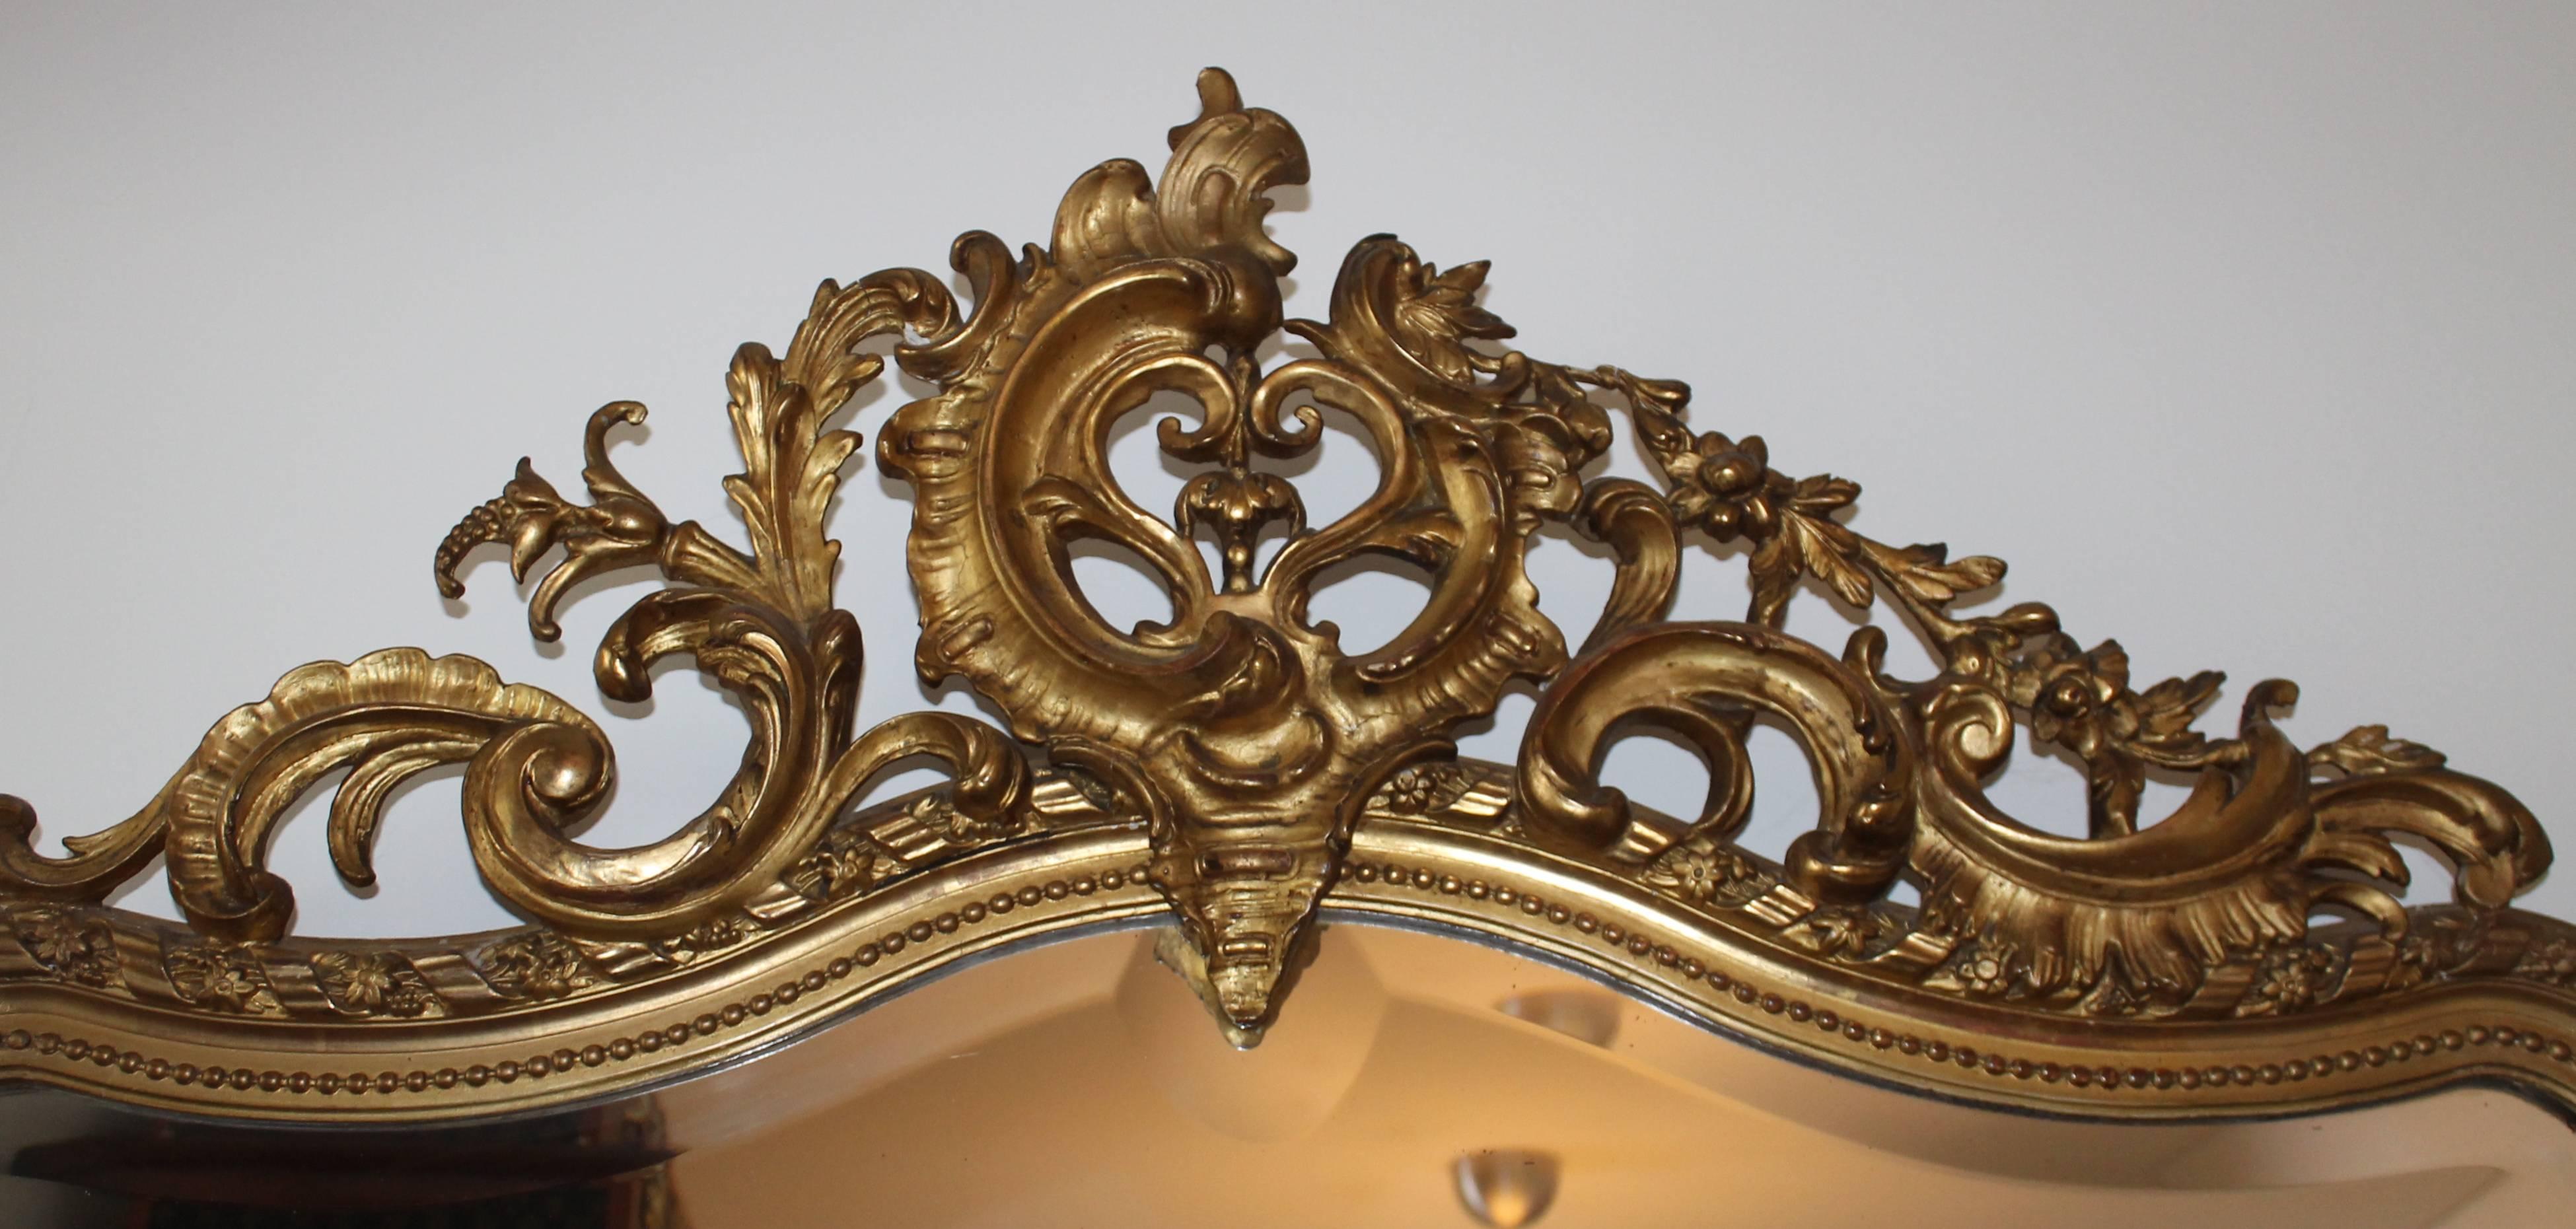 Tall mirror for hall or fireplace in gold with beautiful details.